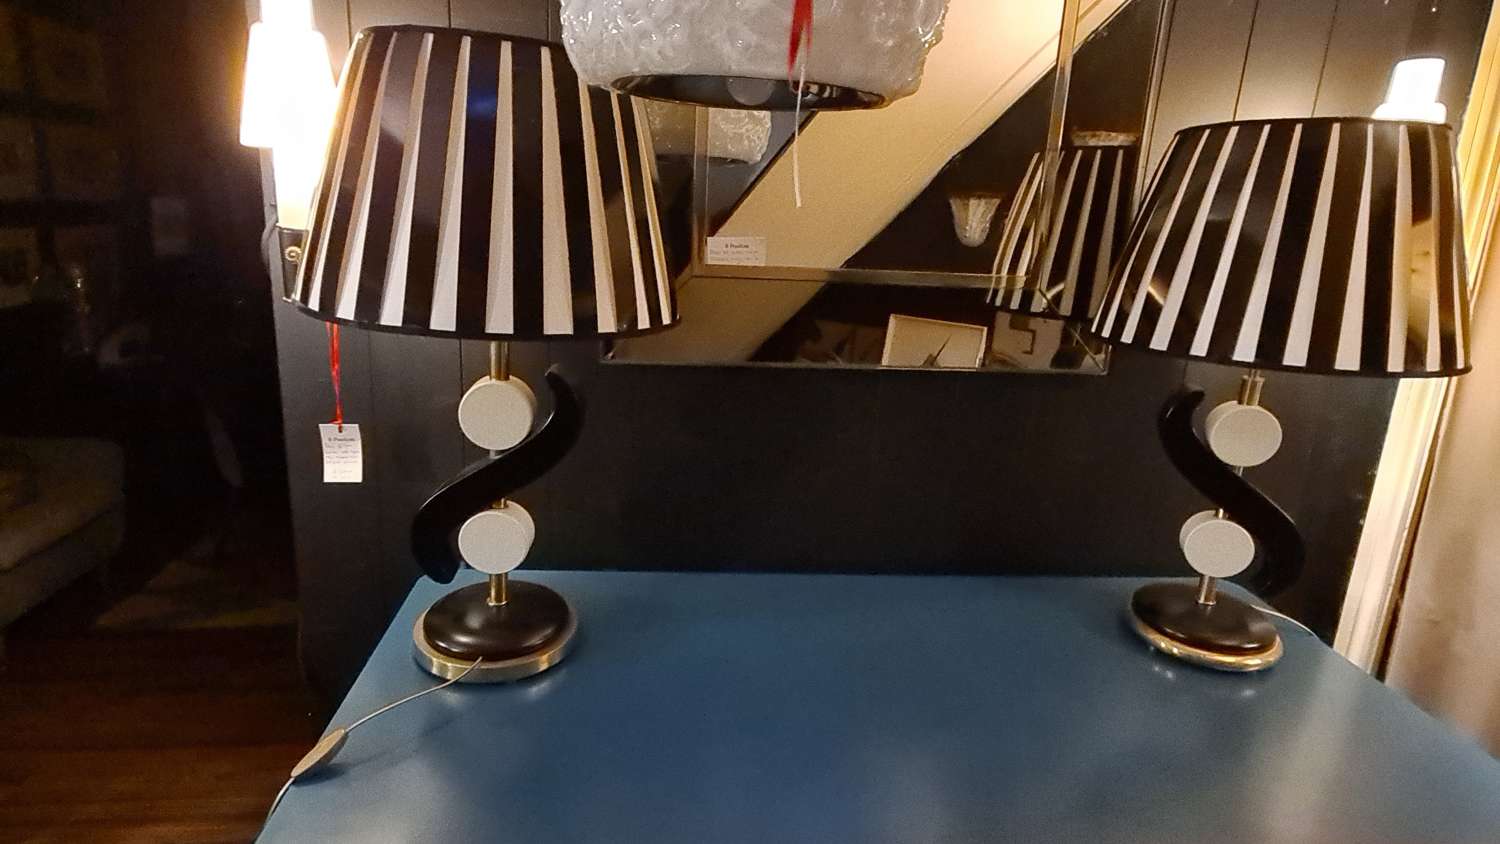 Pair of Majestic table lamps